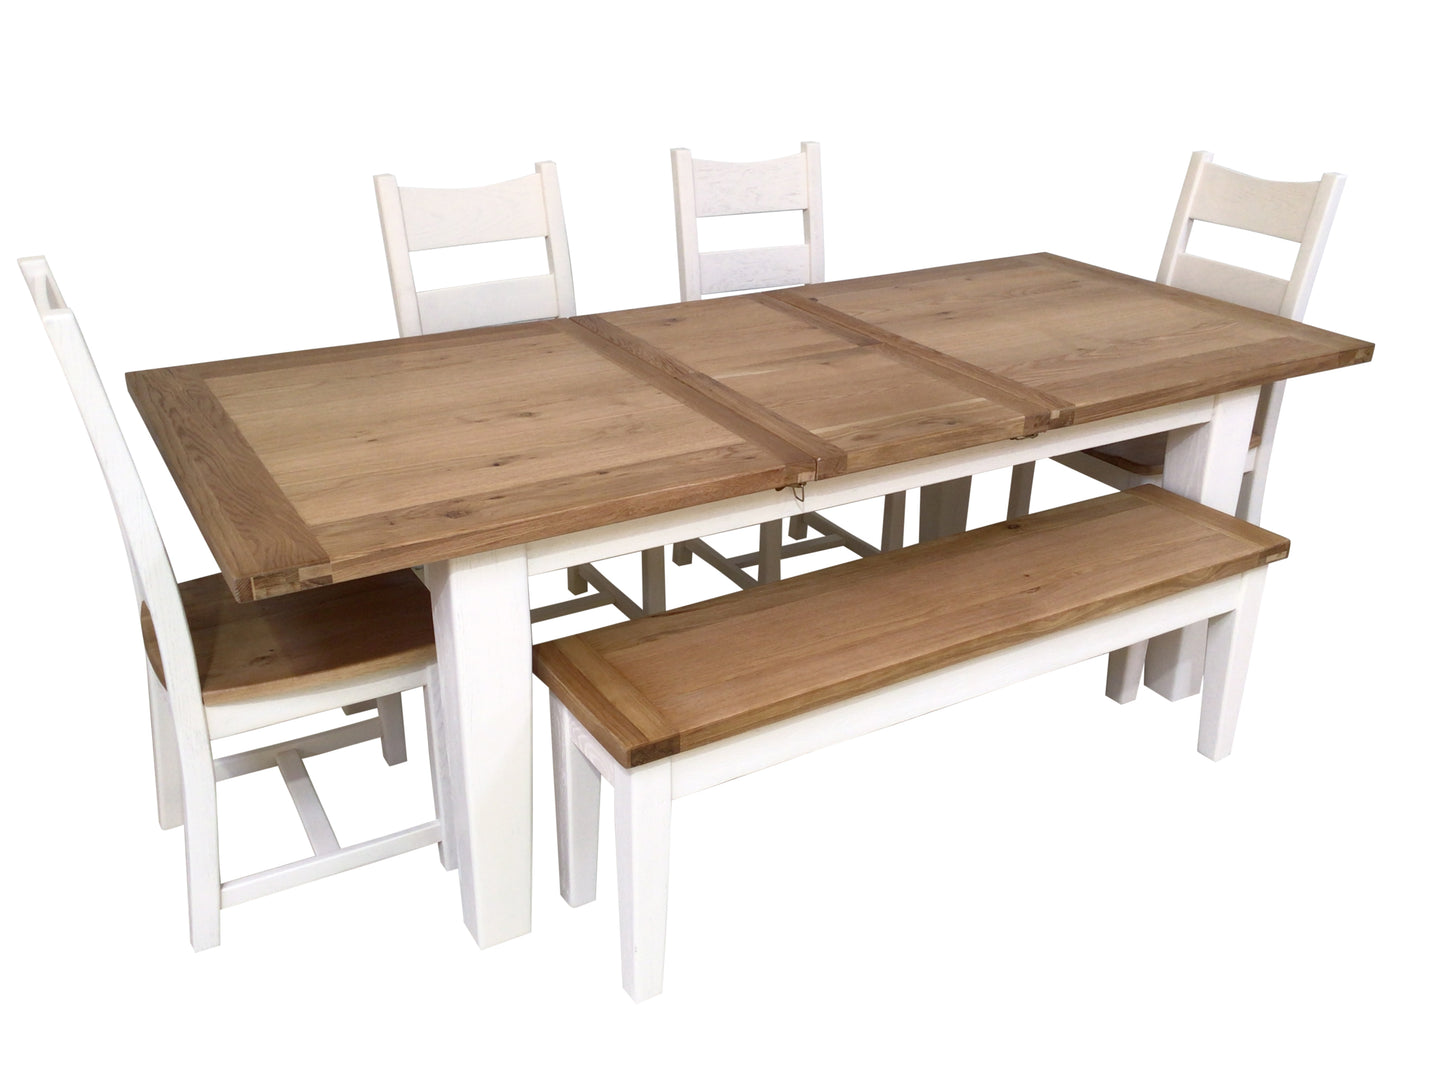 Calgary Oak 1.8m Ext Dining Set - Painted Off-White